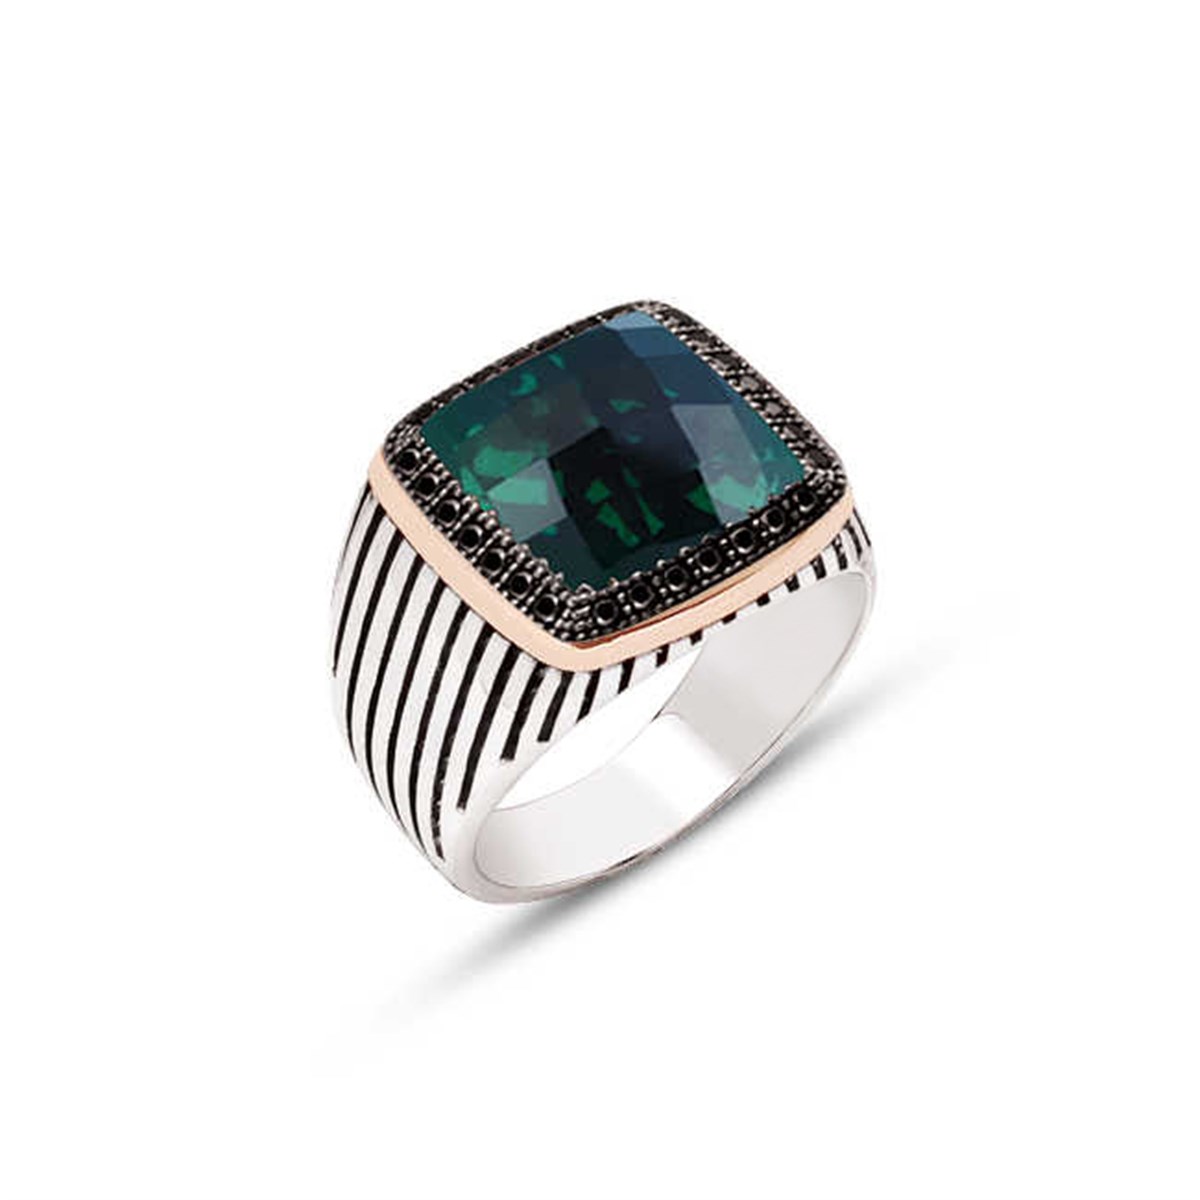 Silver Faceted Green Zircon Stone Embellished Striped Case Men's Ring